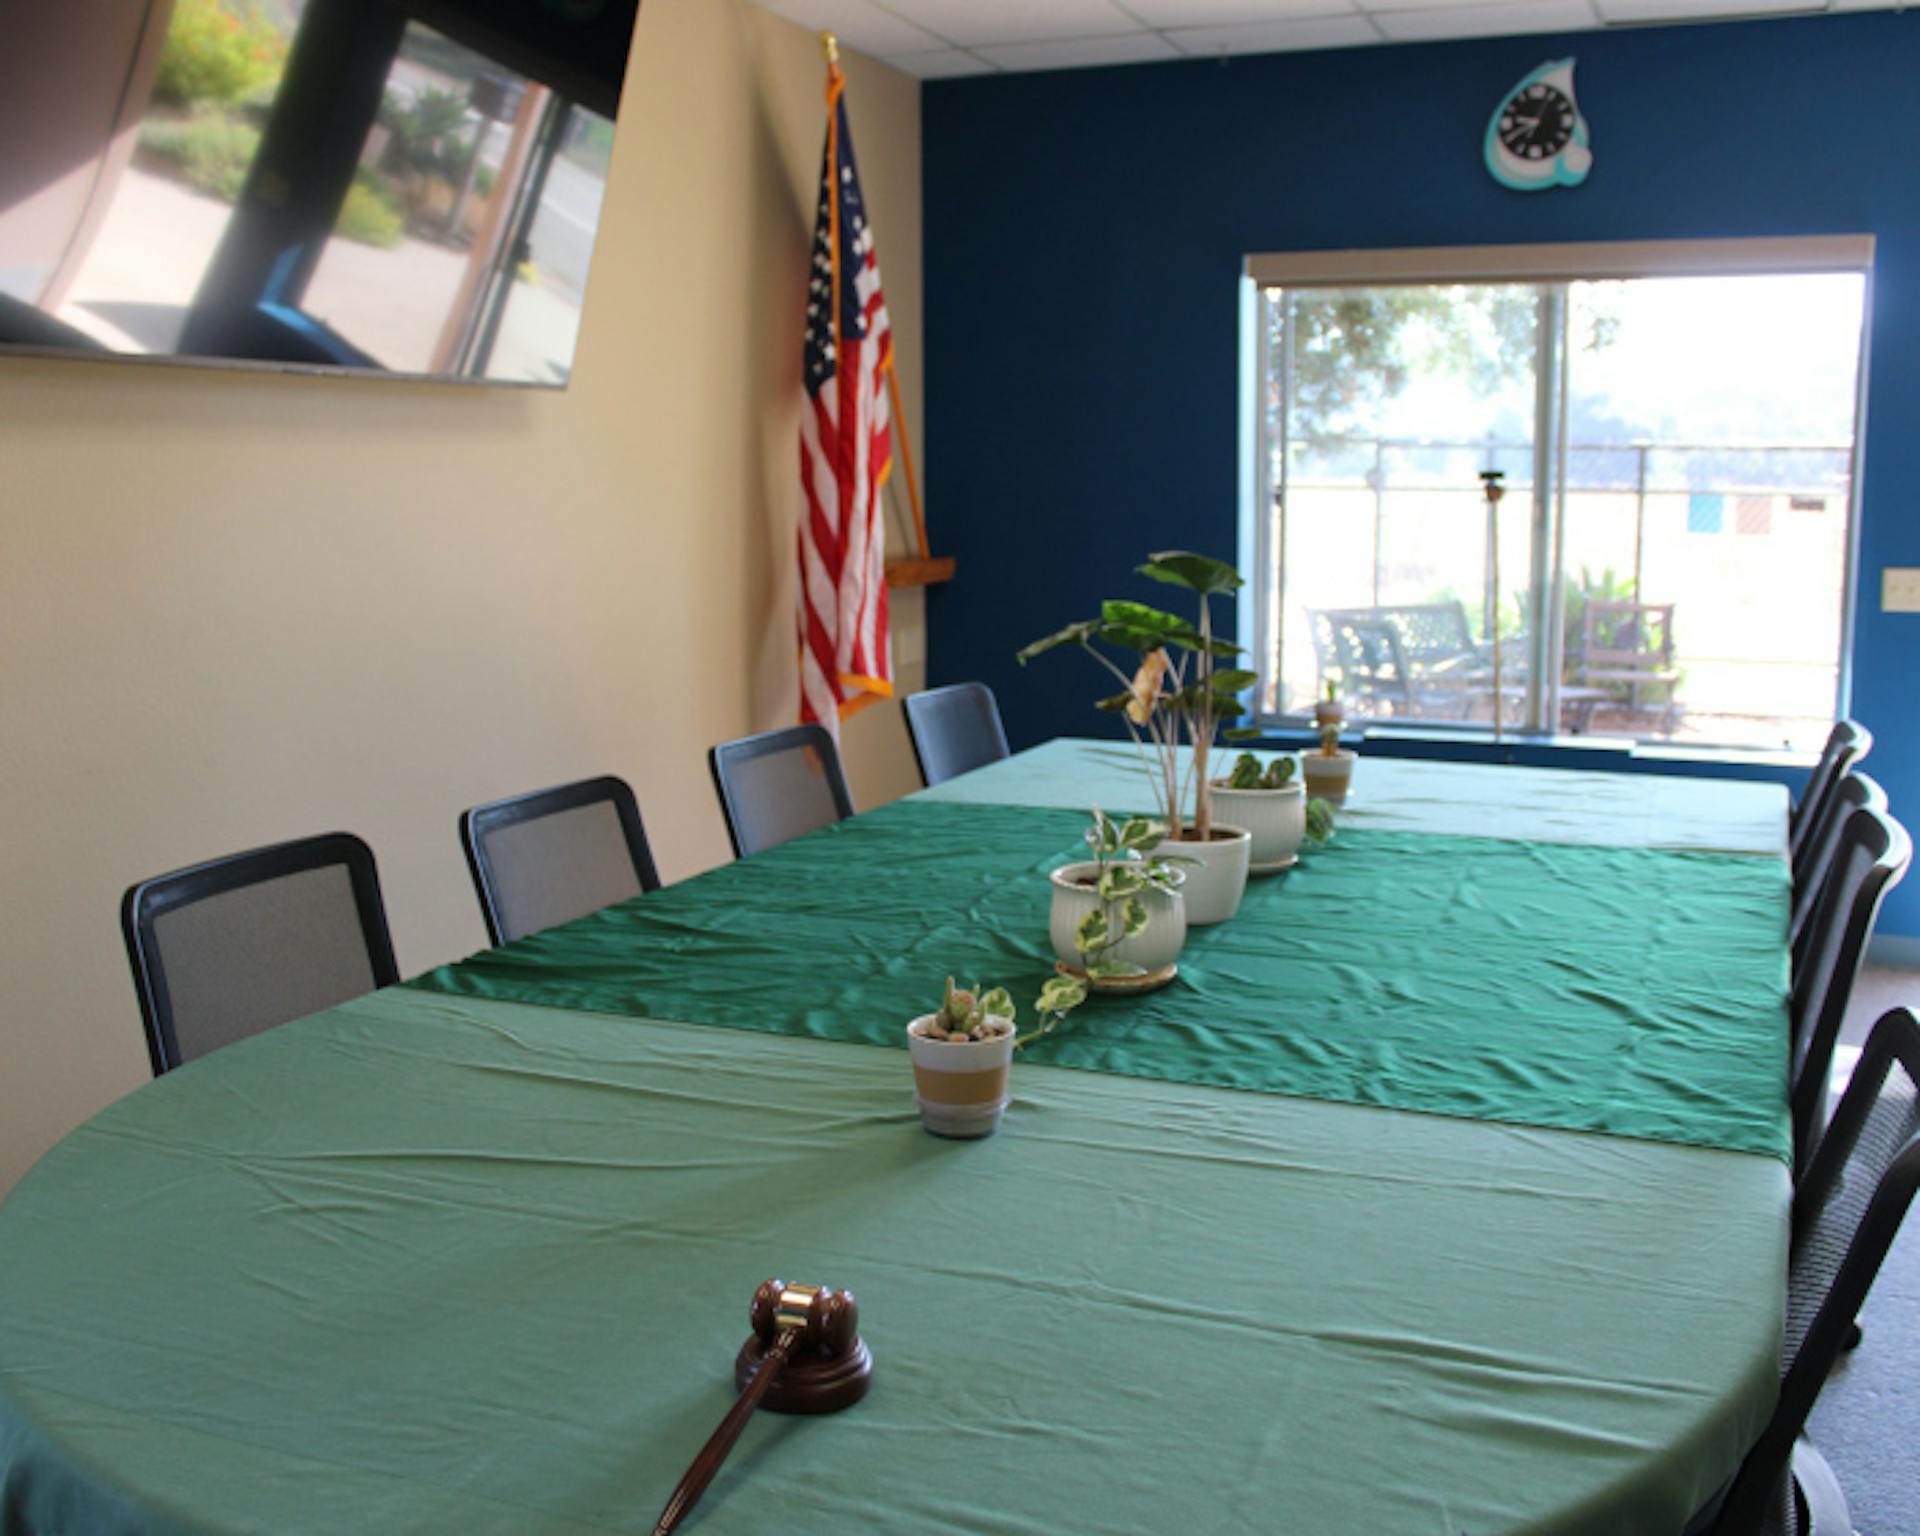 The board meeting room at Ventura River Water District